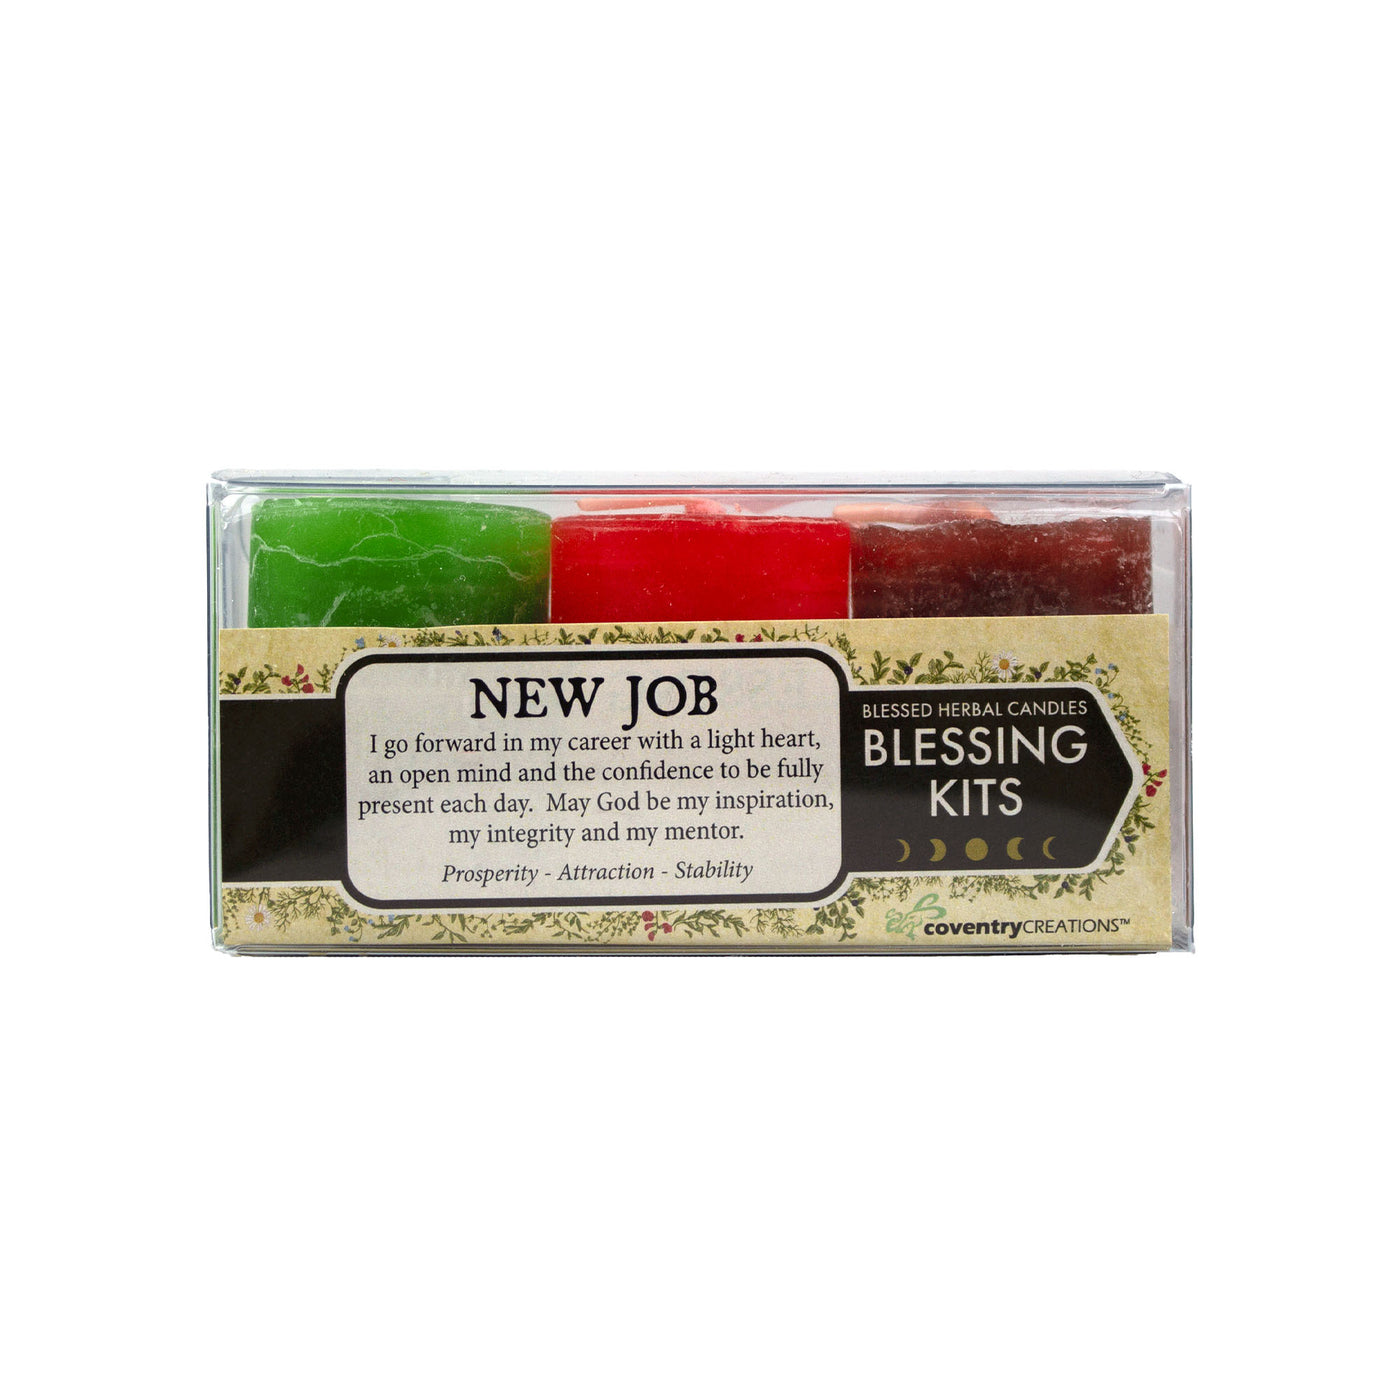 Coventry Creations New Job Blessing Kit. Green Prosperity Votive, Red Attraction Votive, and Brown Stability Votive